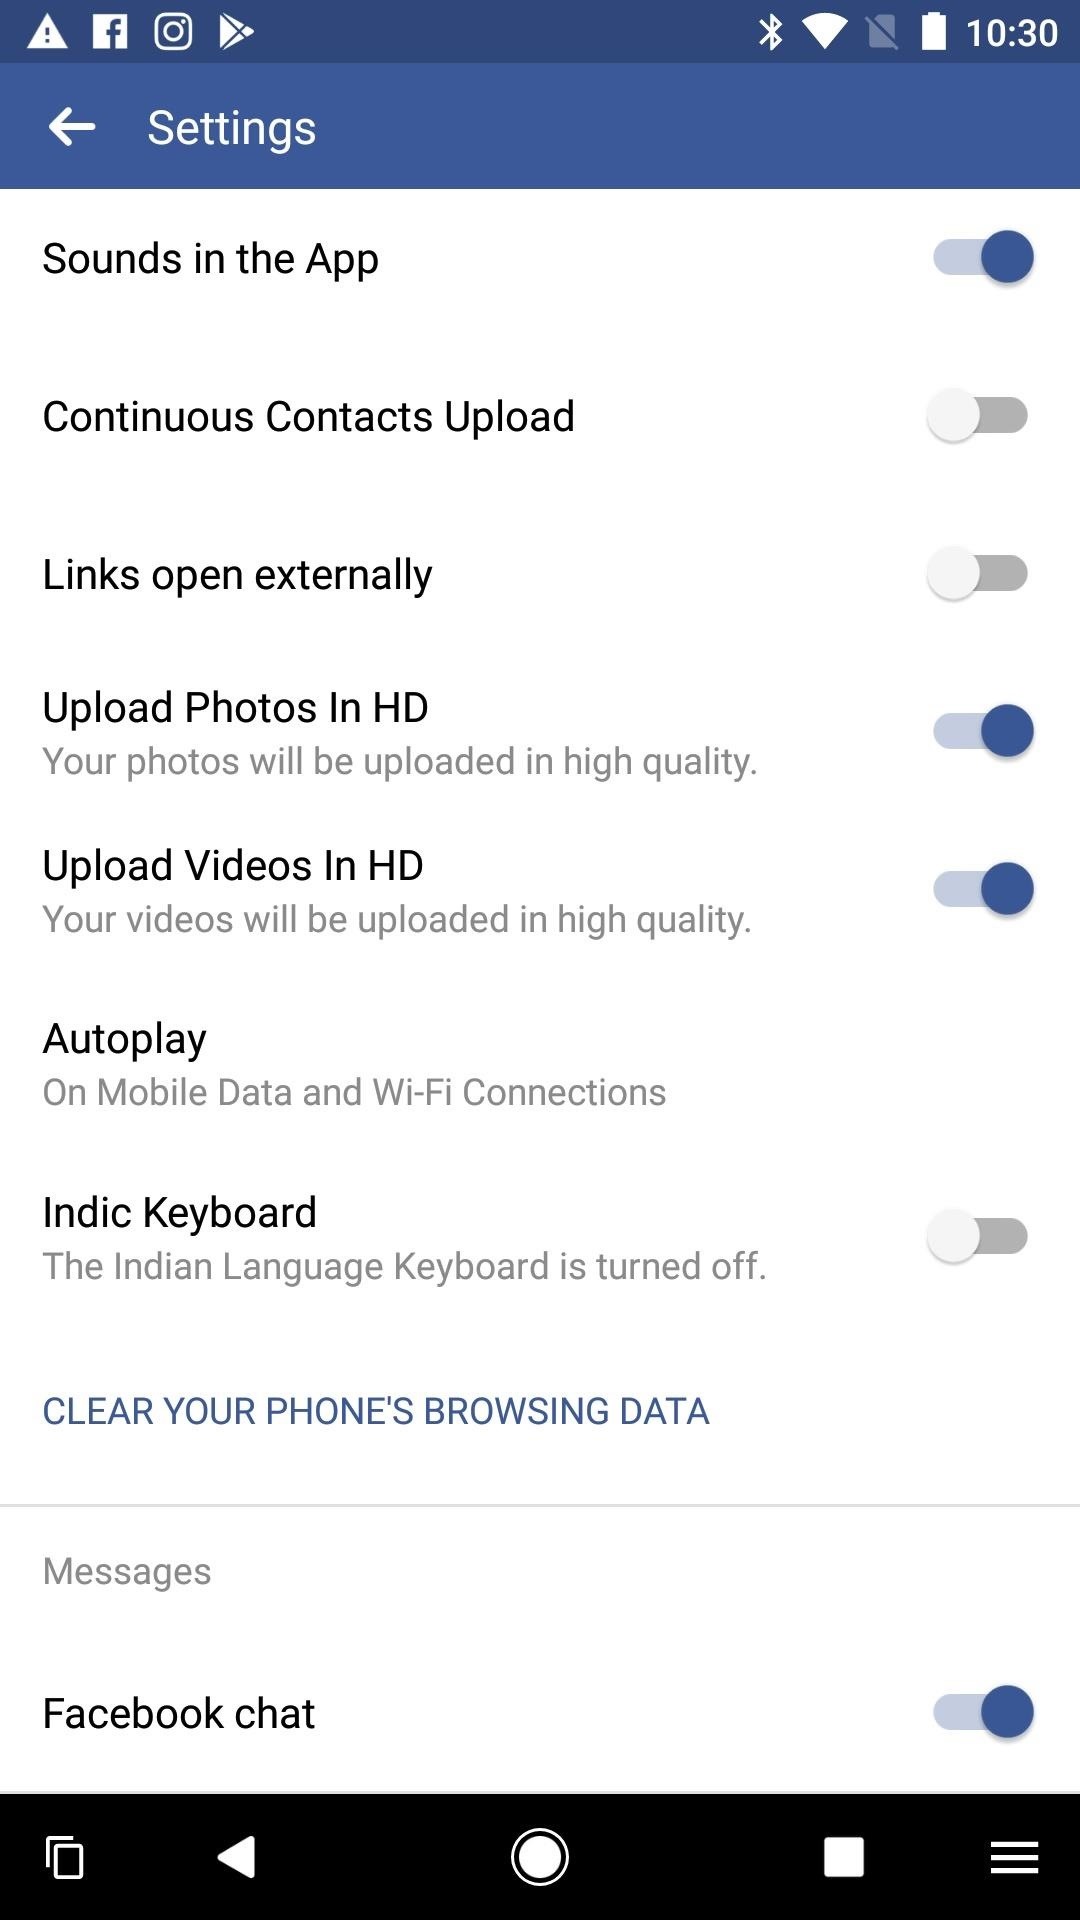 Facebook 101: How to Upload Photos & Videos in HD